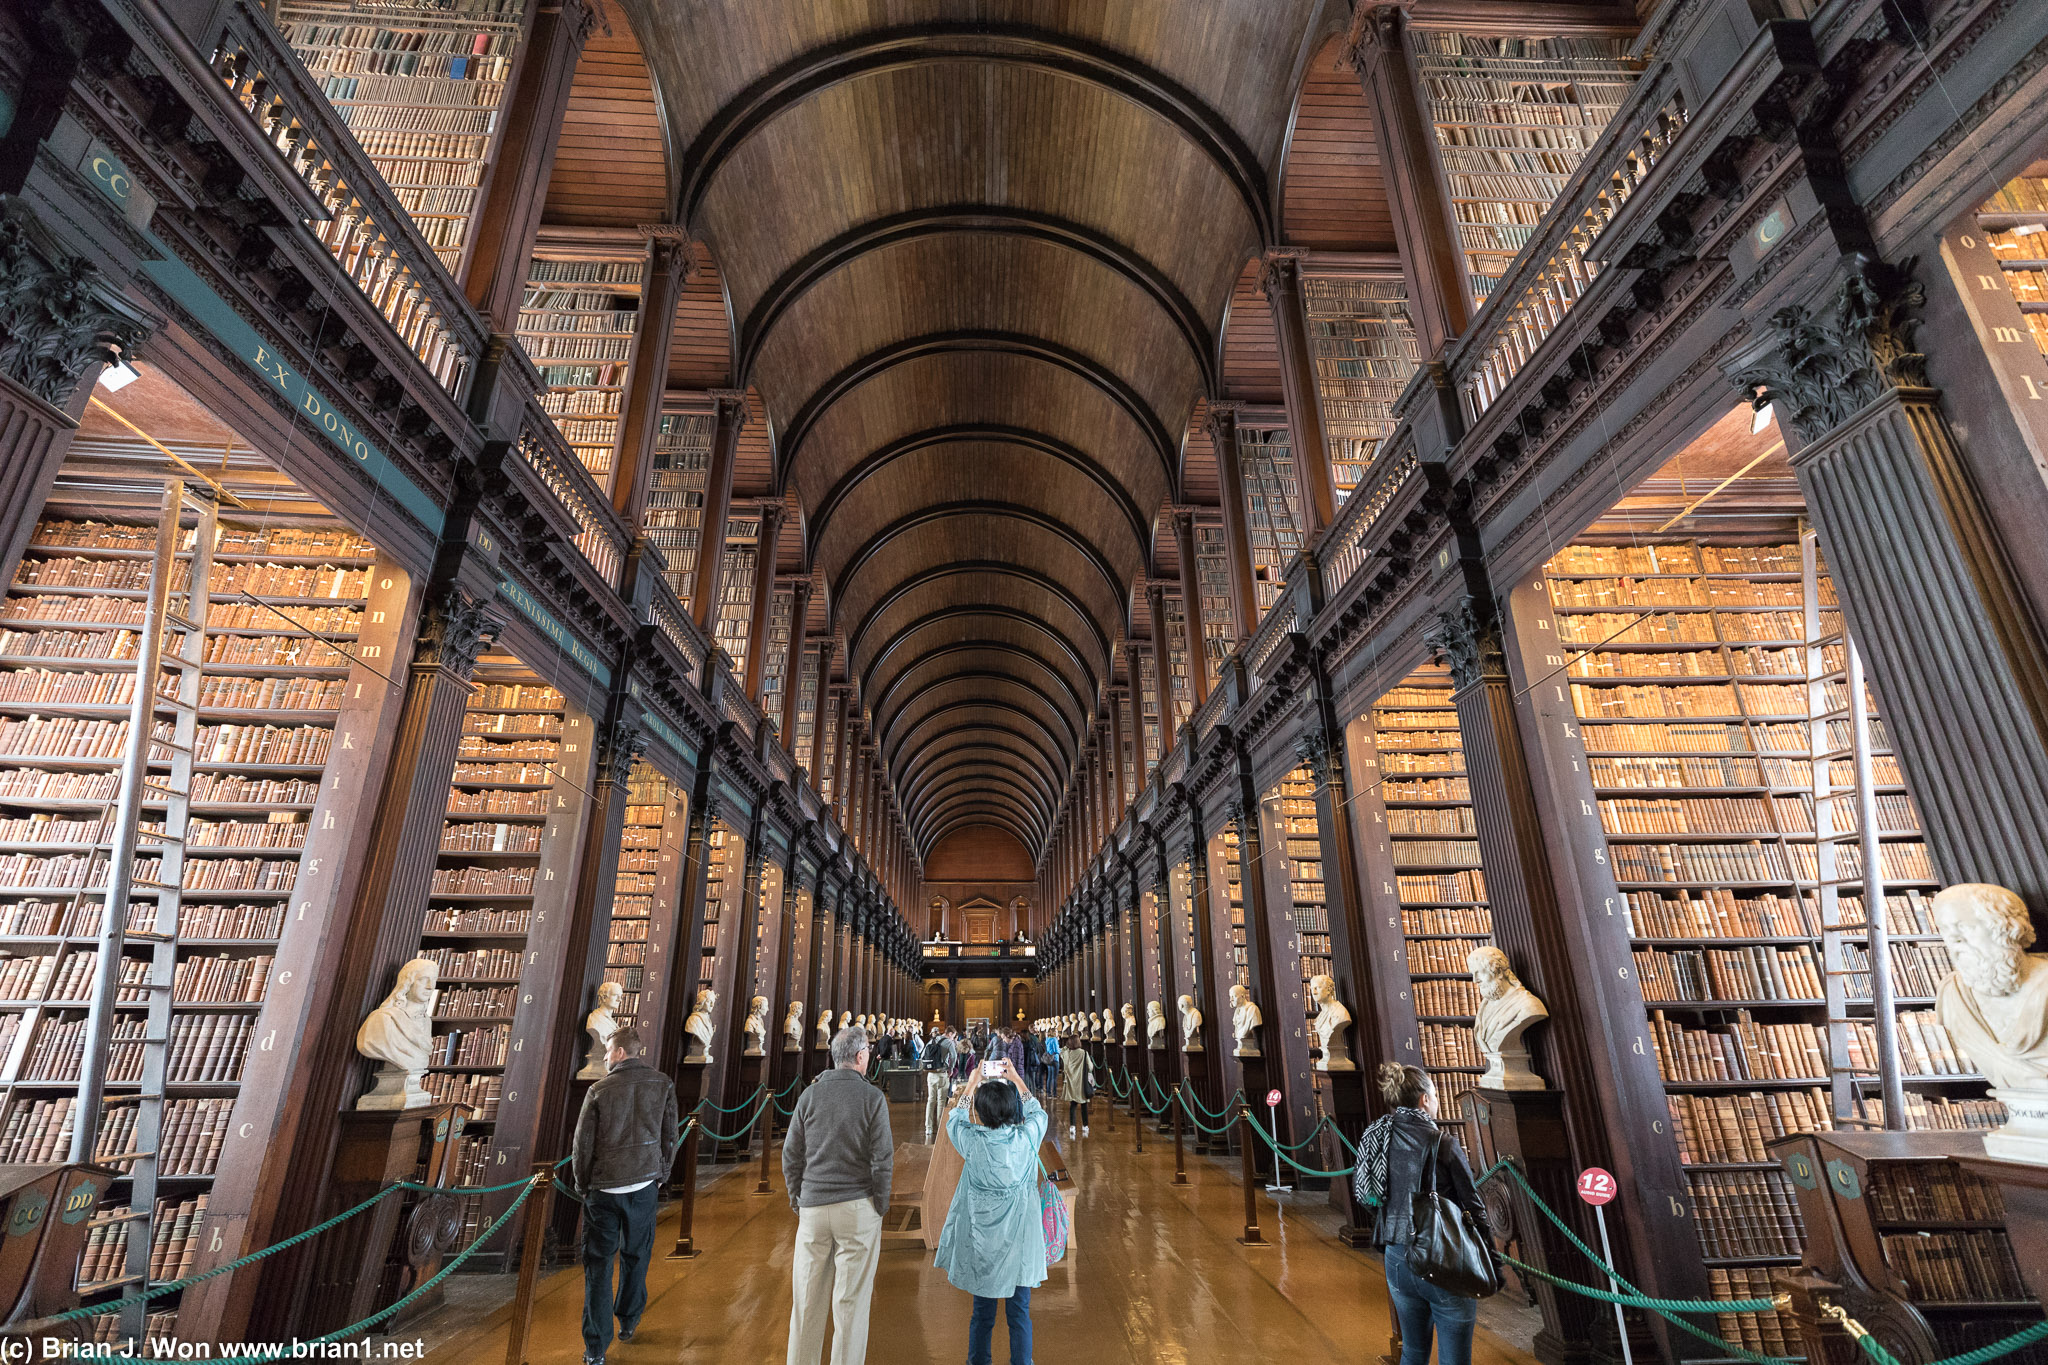 The Long Room at Trinity College.